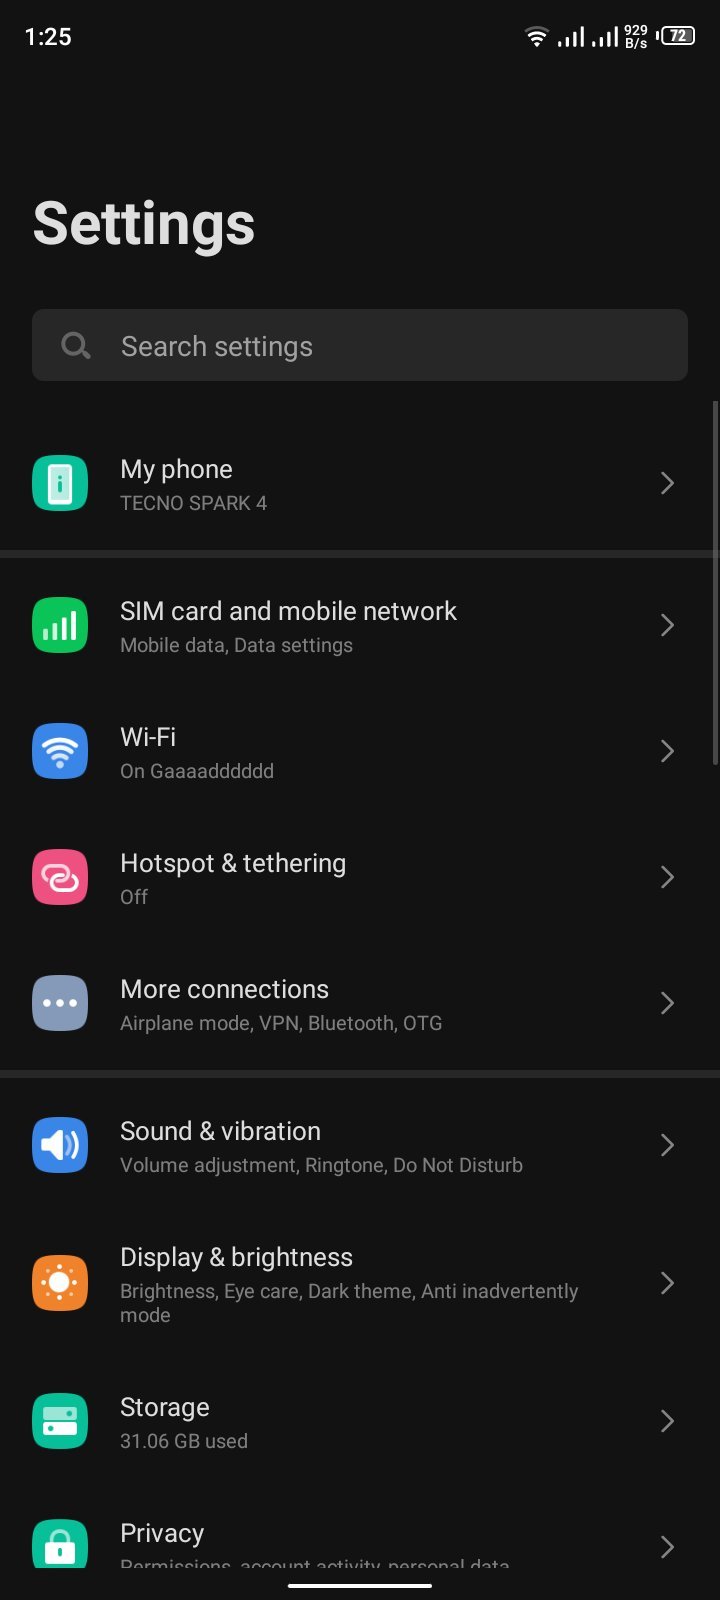 Tecno Spark 4 now receiving Android 10 update base on HiOS 6.2.0